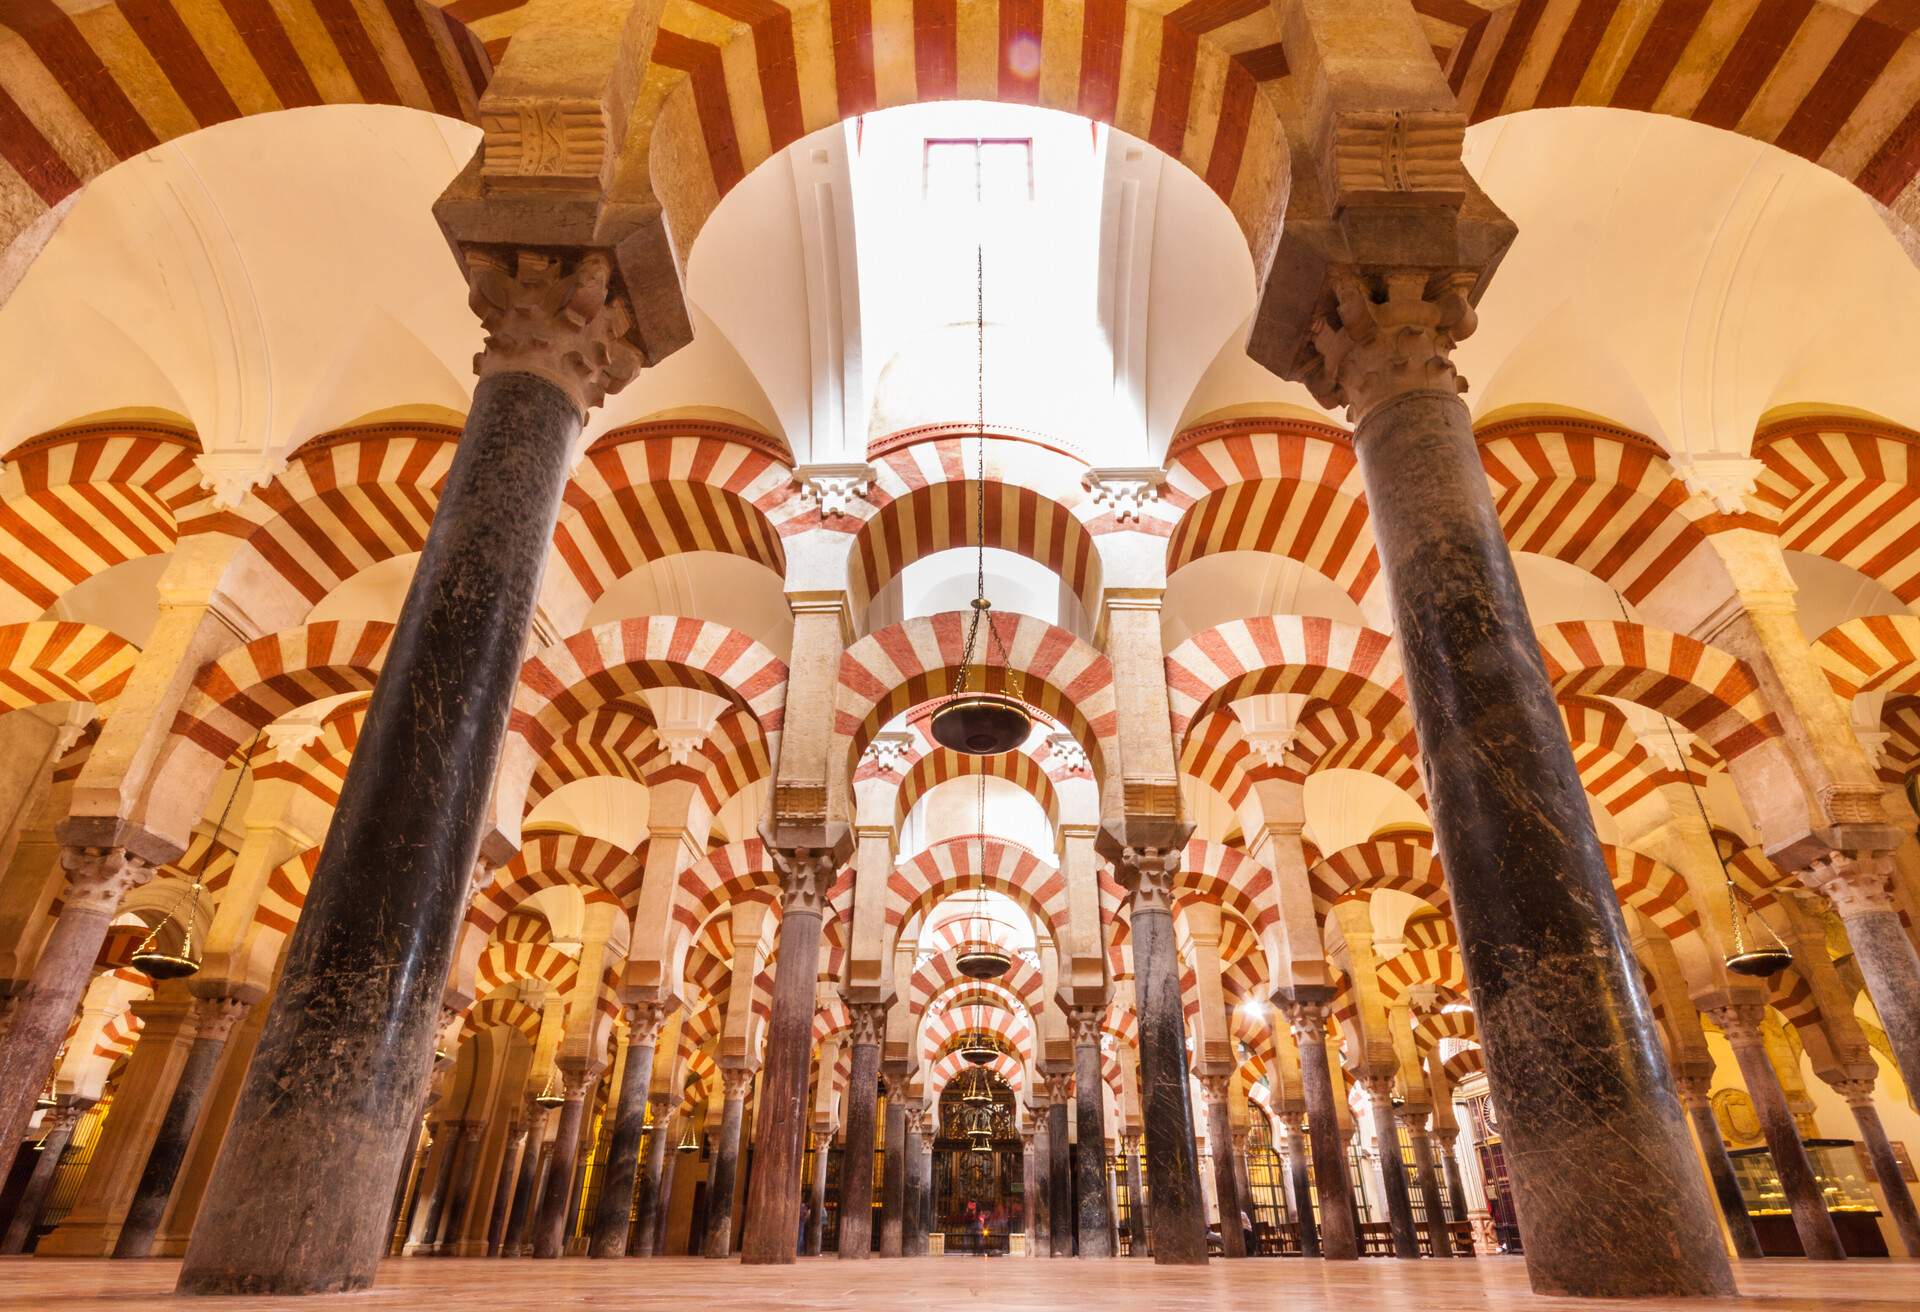 DEST_SPAIN_CORDOBA_CATHEDRAL-FORMER-GREAT-MOSQUE_UNESCO